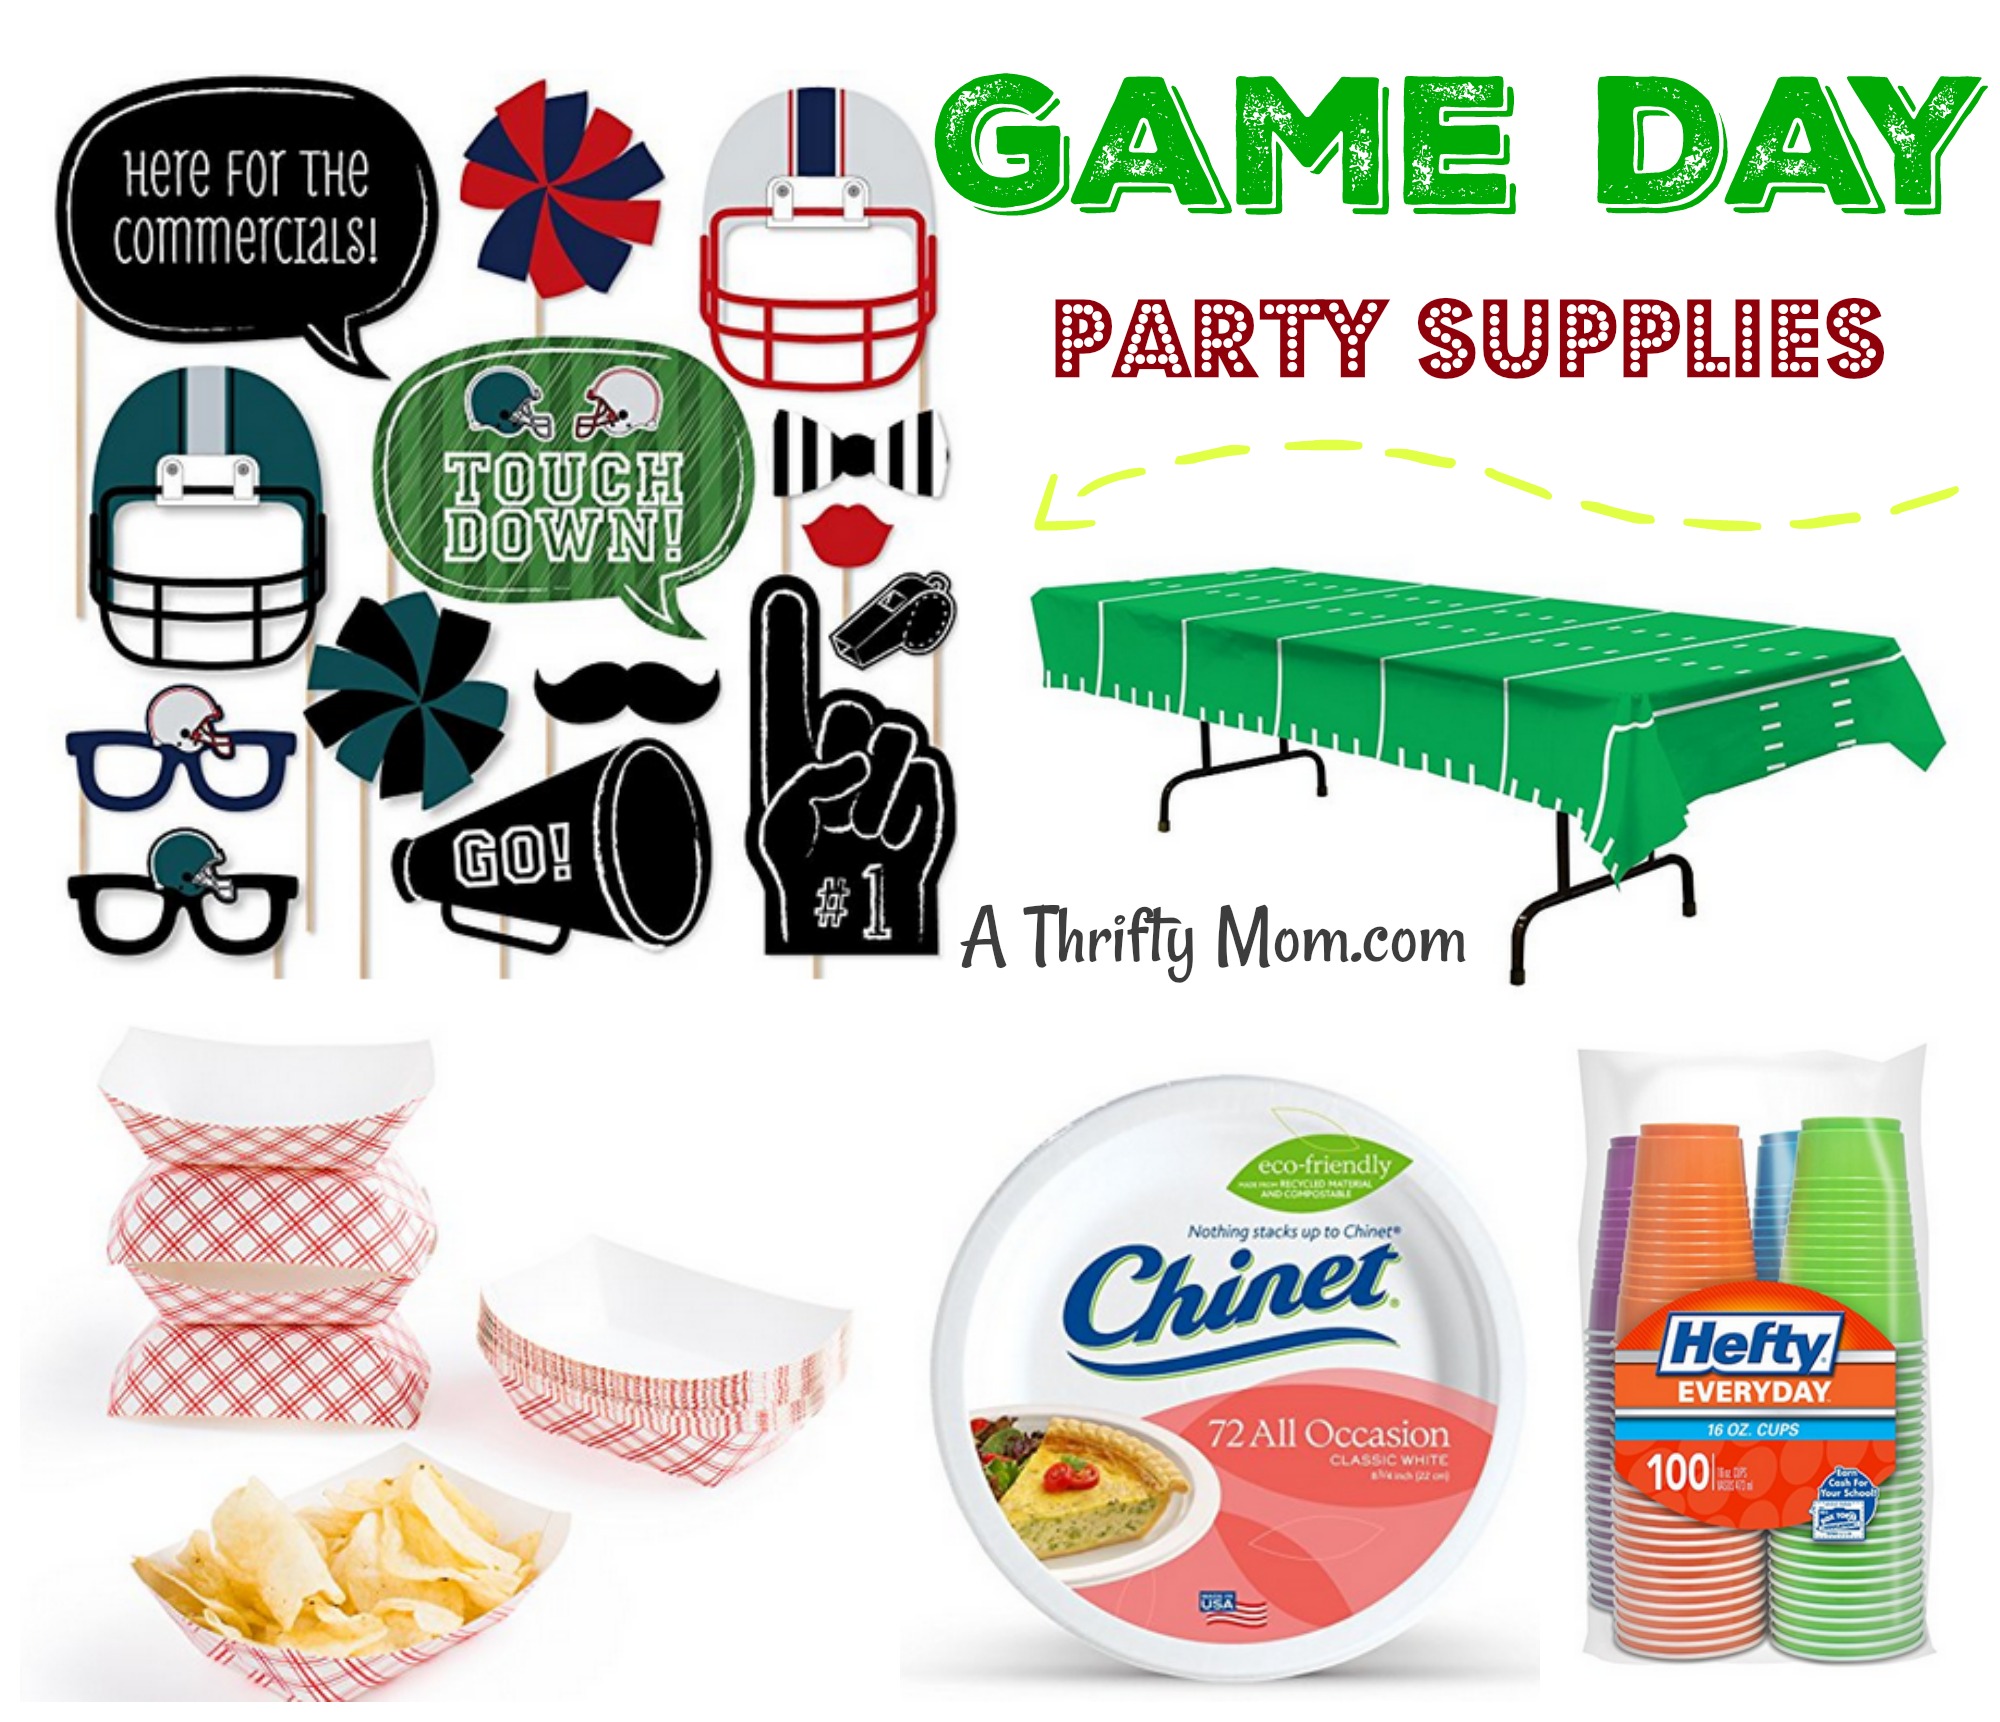 Game Day Party Supplies